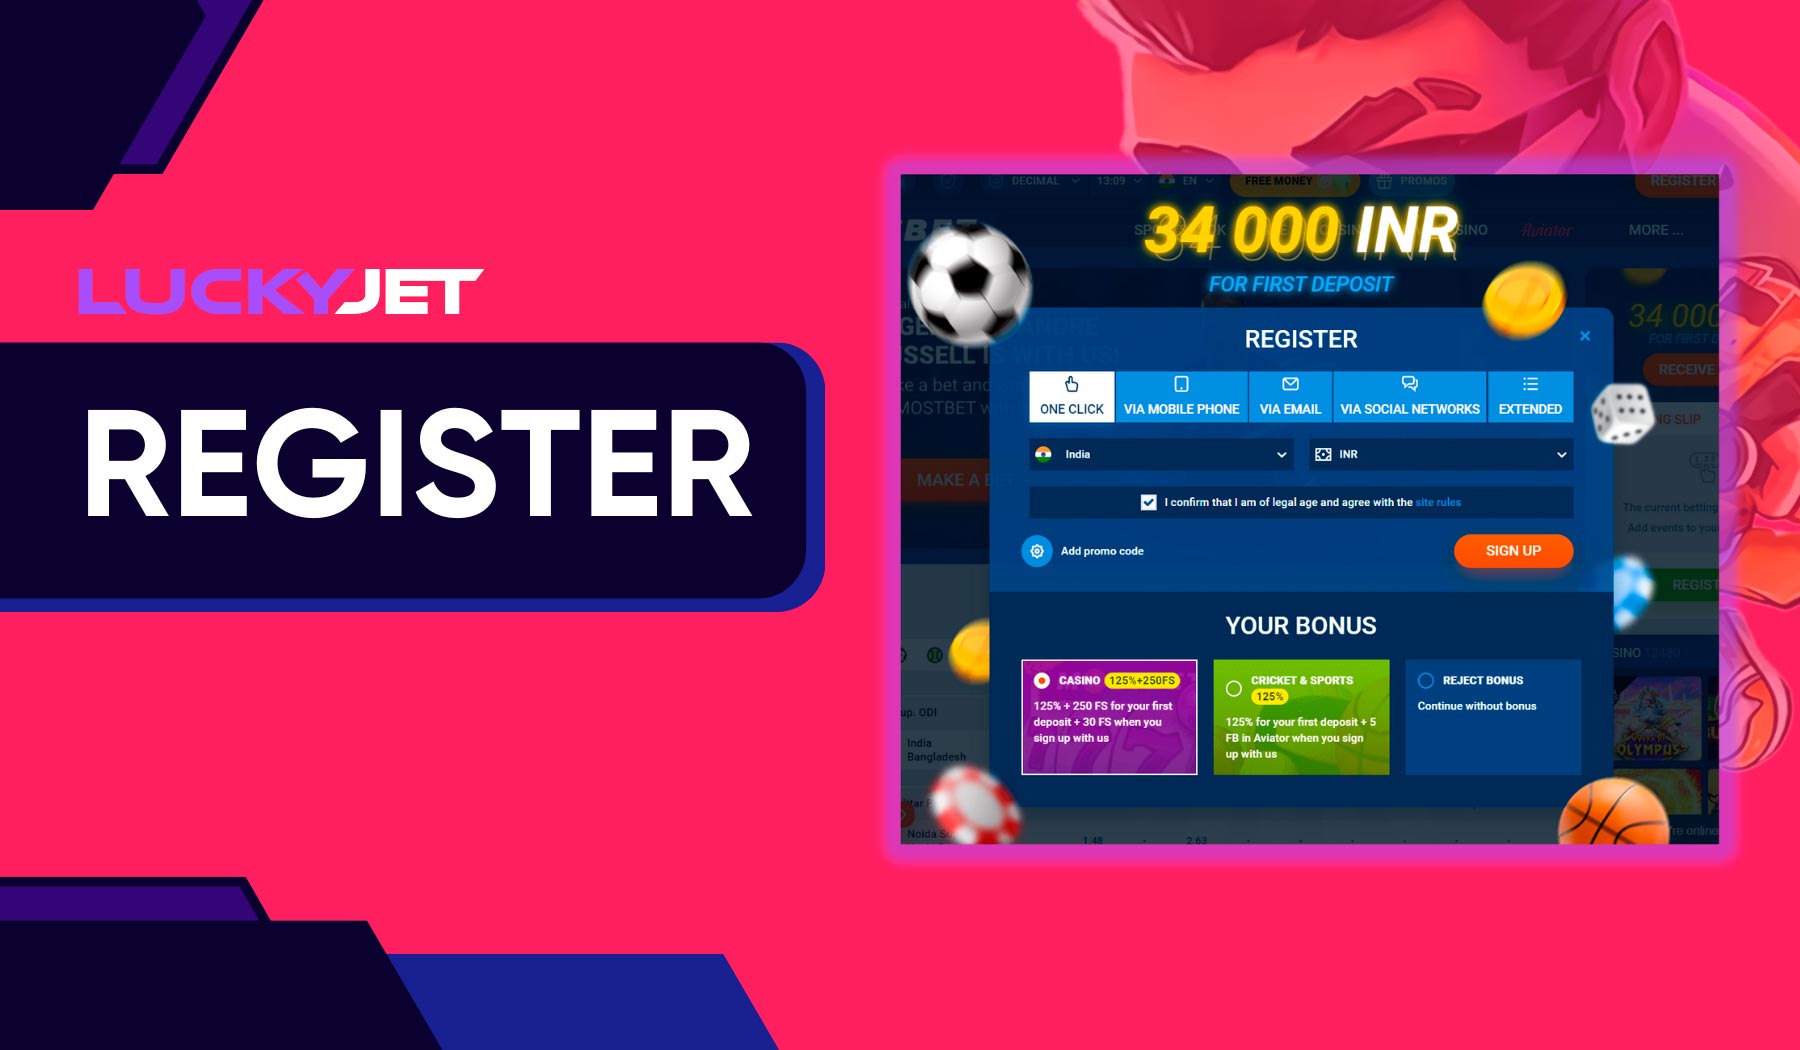 To play Lucky Jet, you need to complete a quick registration on the Mostbet